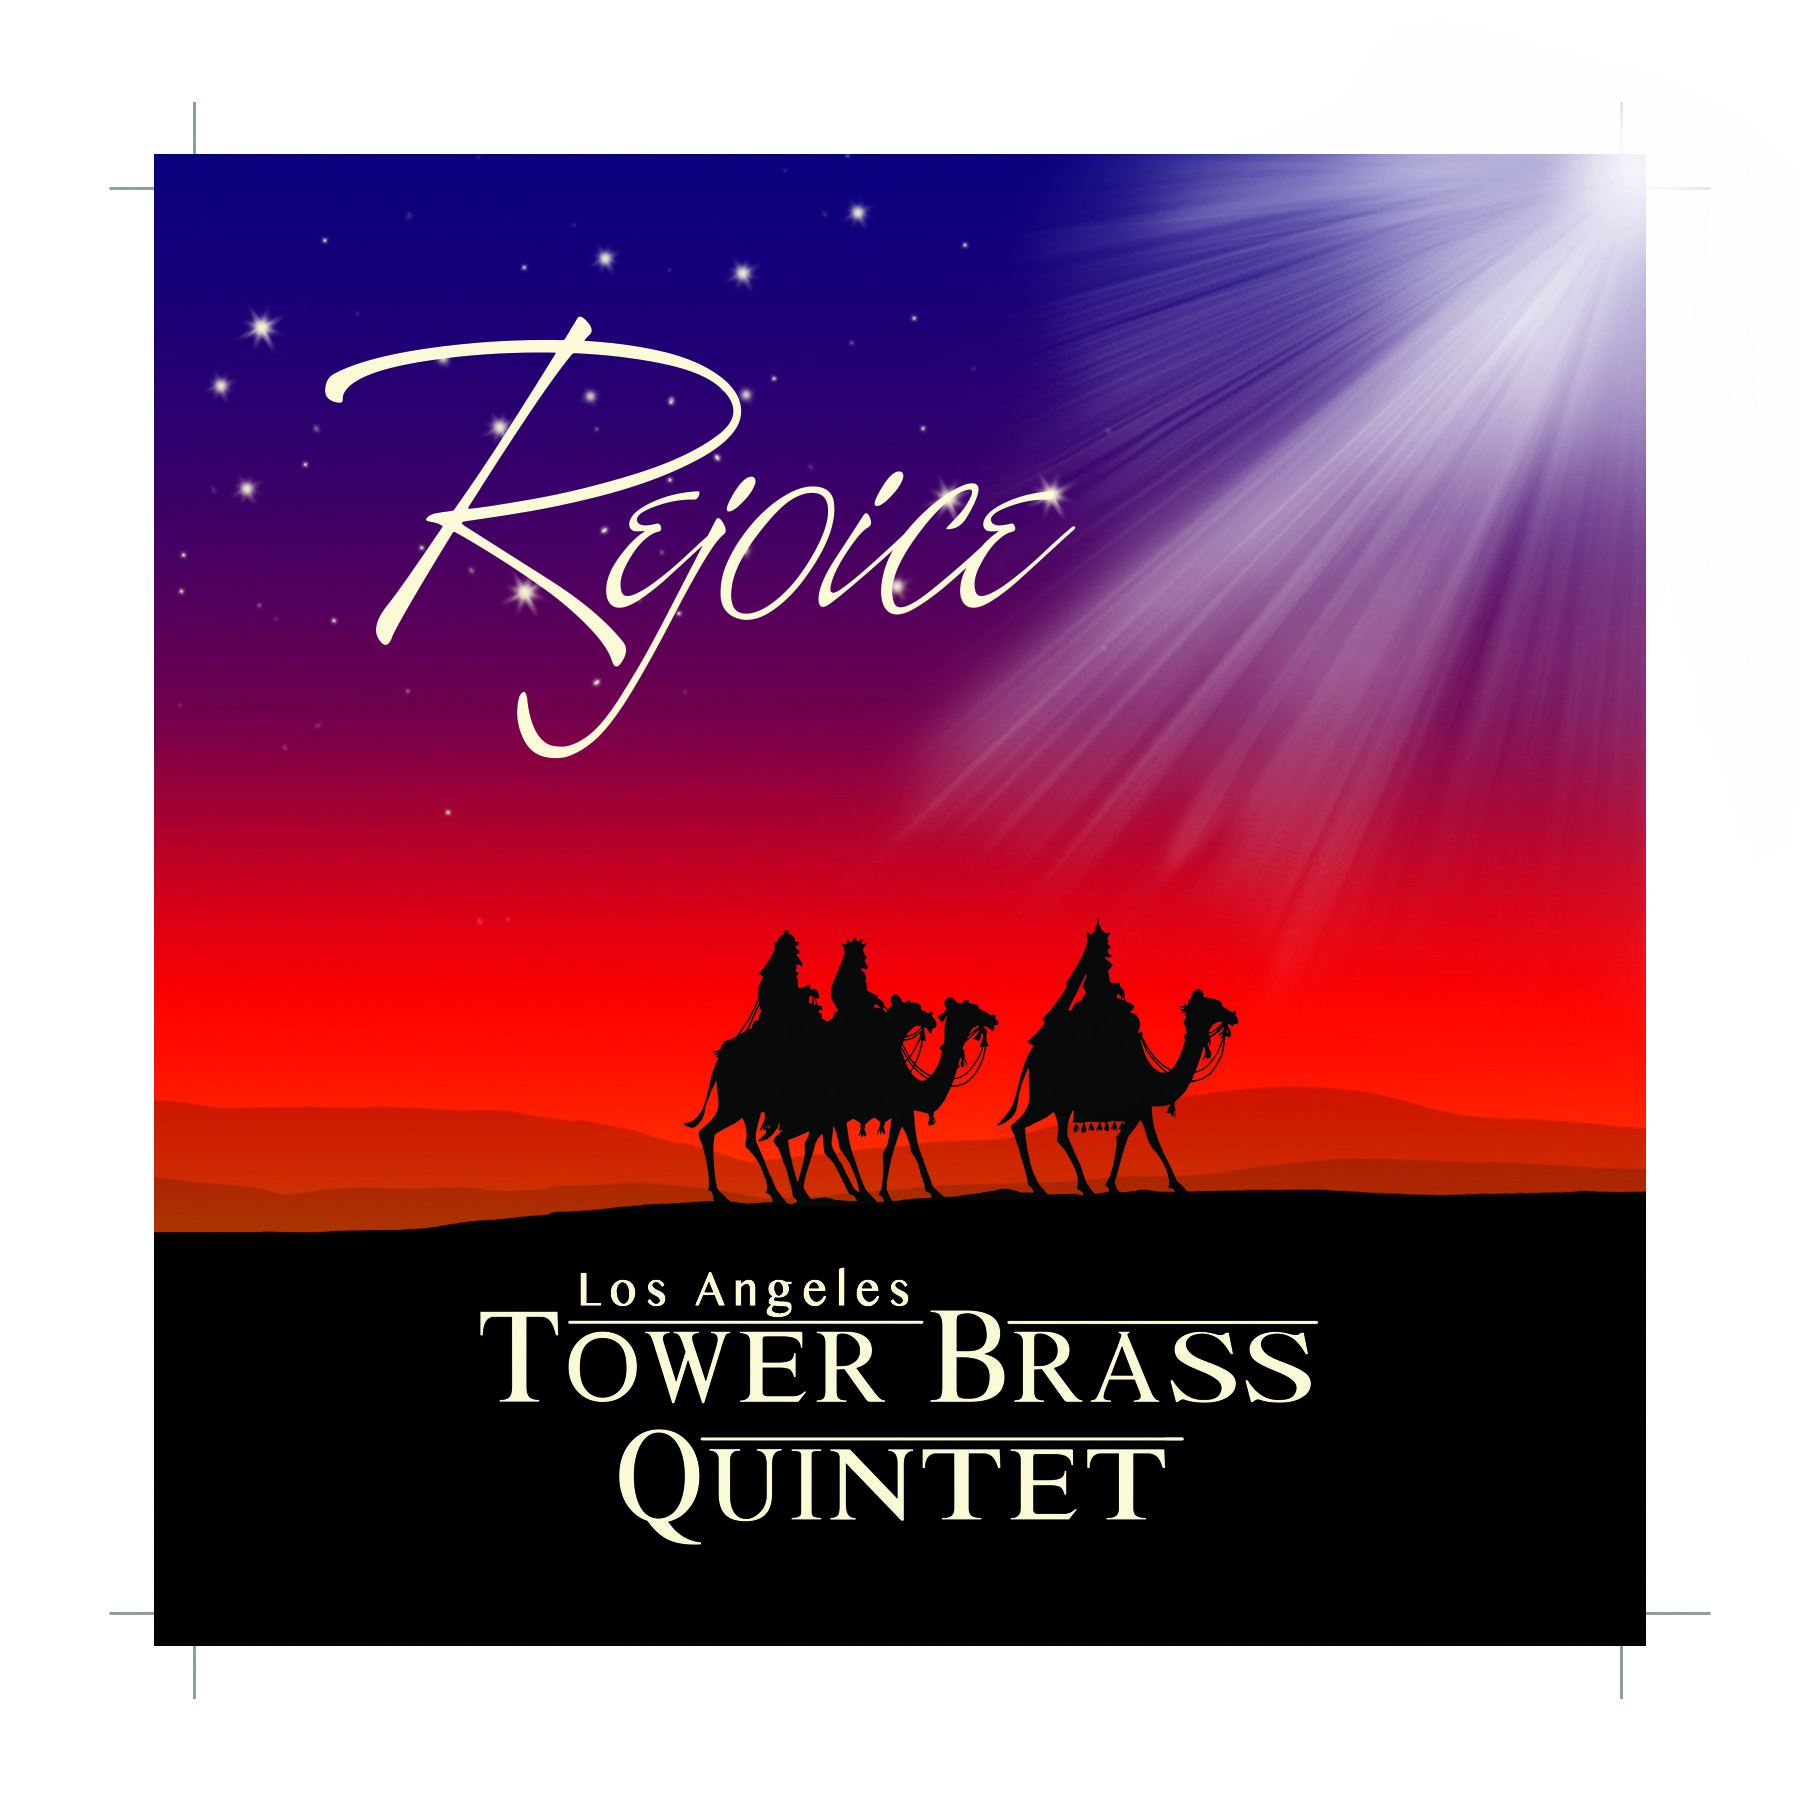 Featured image for “Season’s Greetings from the Tower Brass”